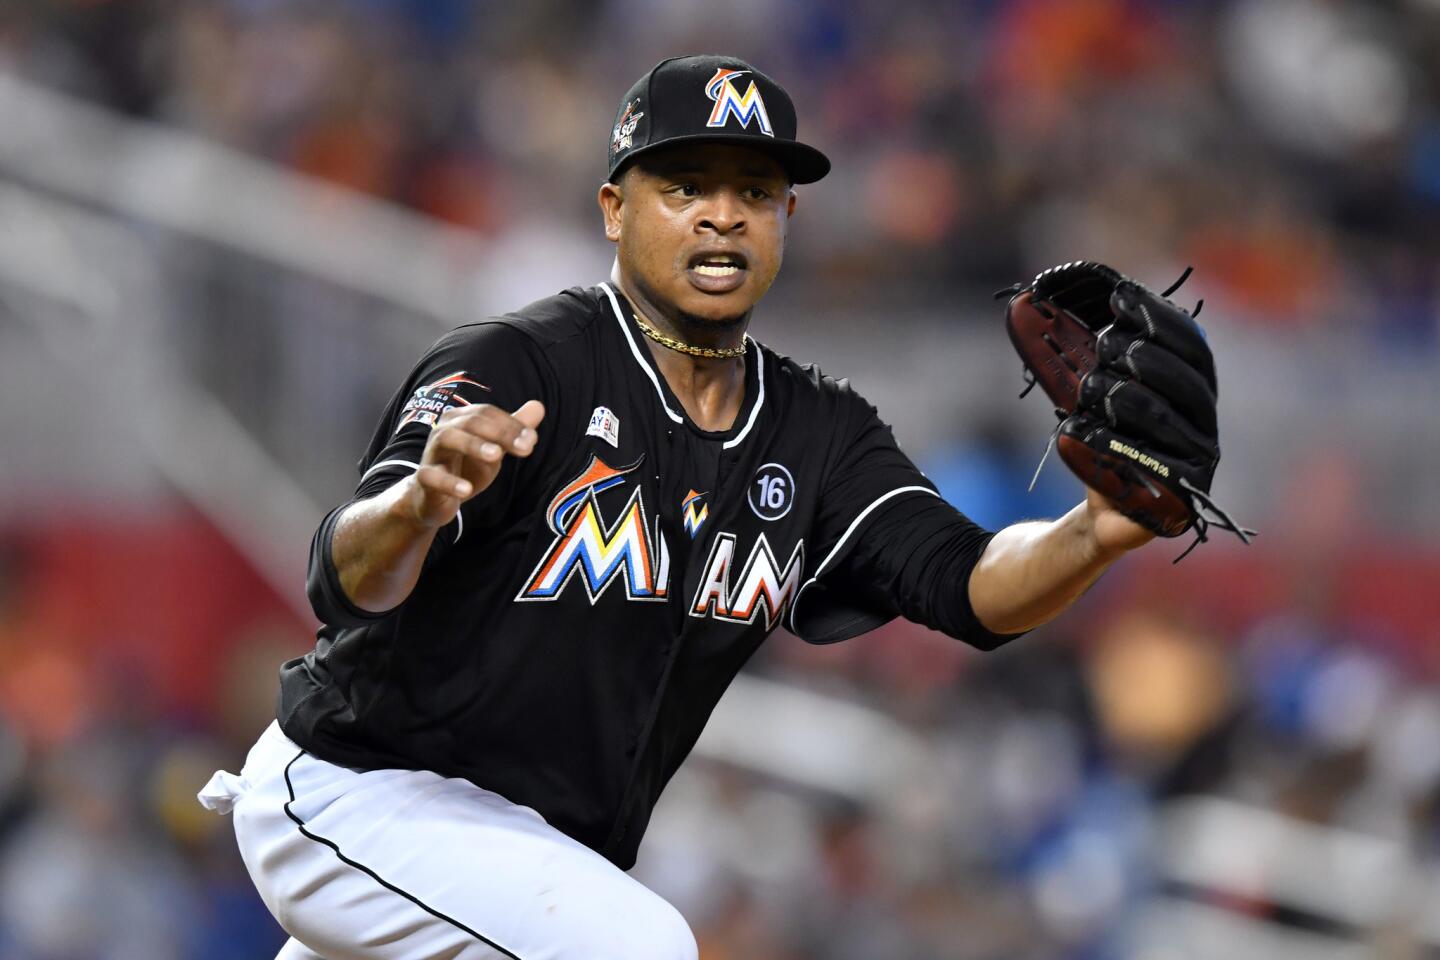 Miami Marlins' Edinson Volquez delivers a pitch during the fourth inning of a baseball game against the Arizona Diamondbacks, Saturday, June 3, 2017, in Miami. The Marlins defeated the Diamondbacks 3-0 in a no-hitter. (AP Photo/Wilfredo Lee)